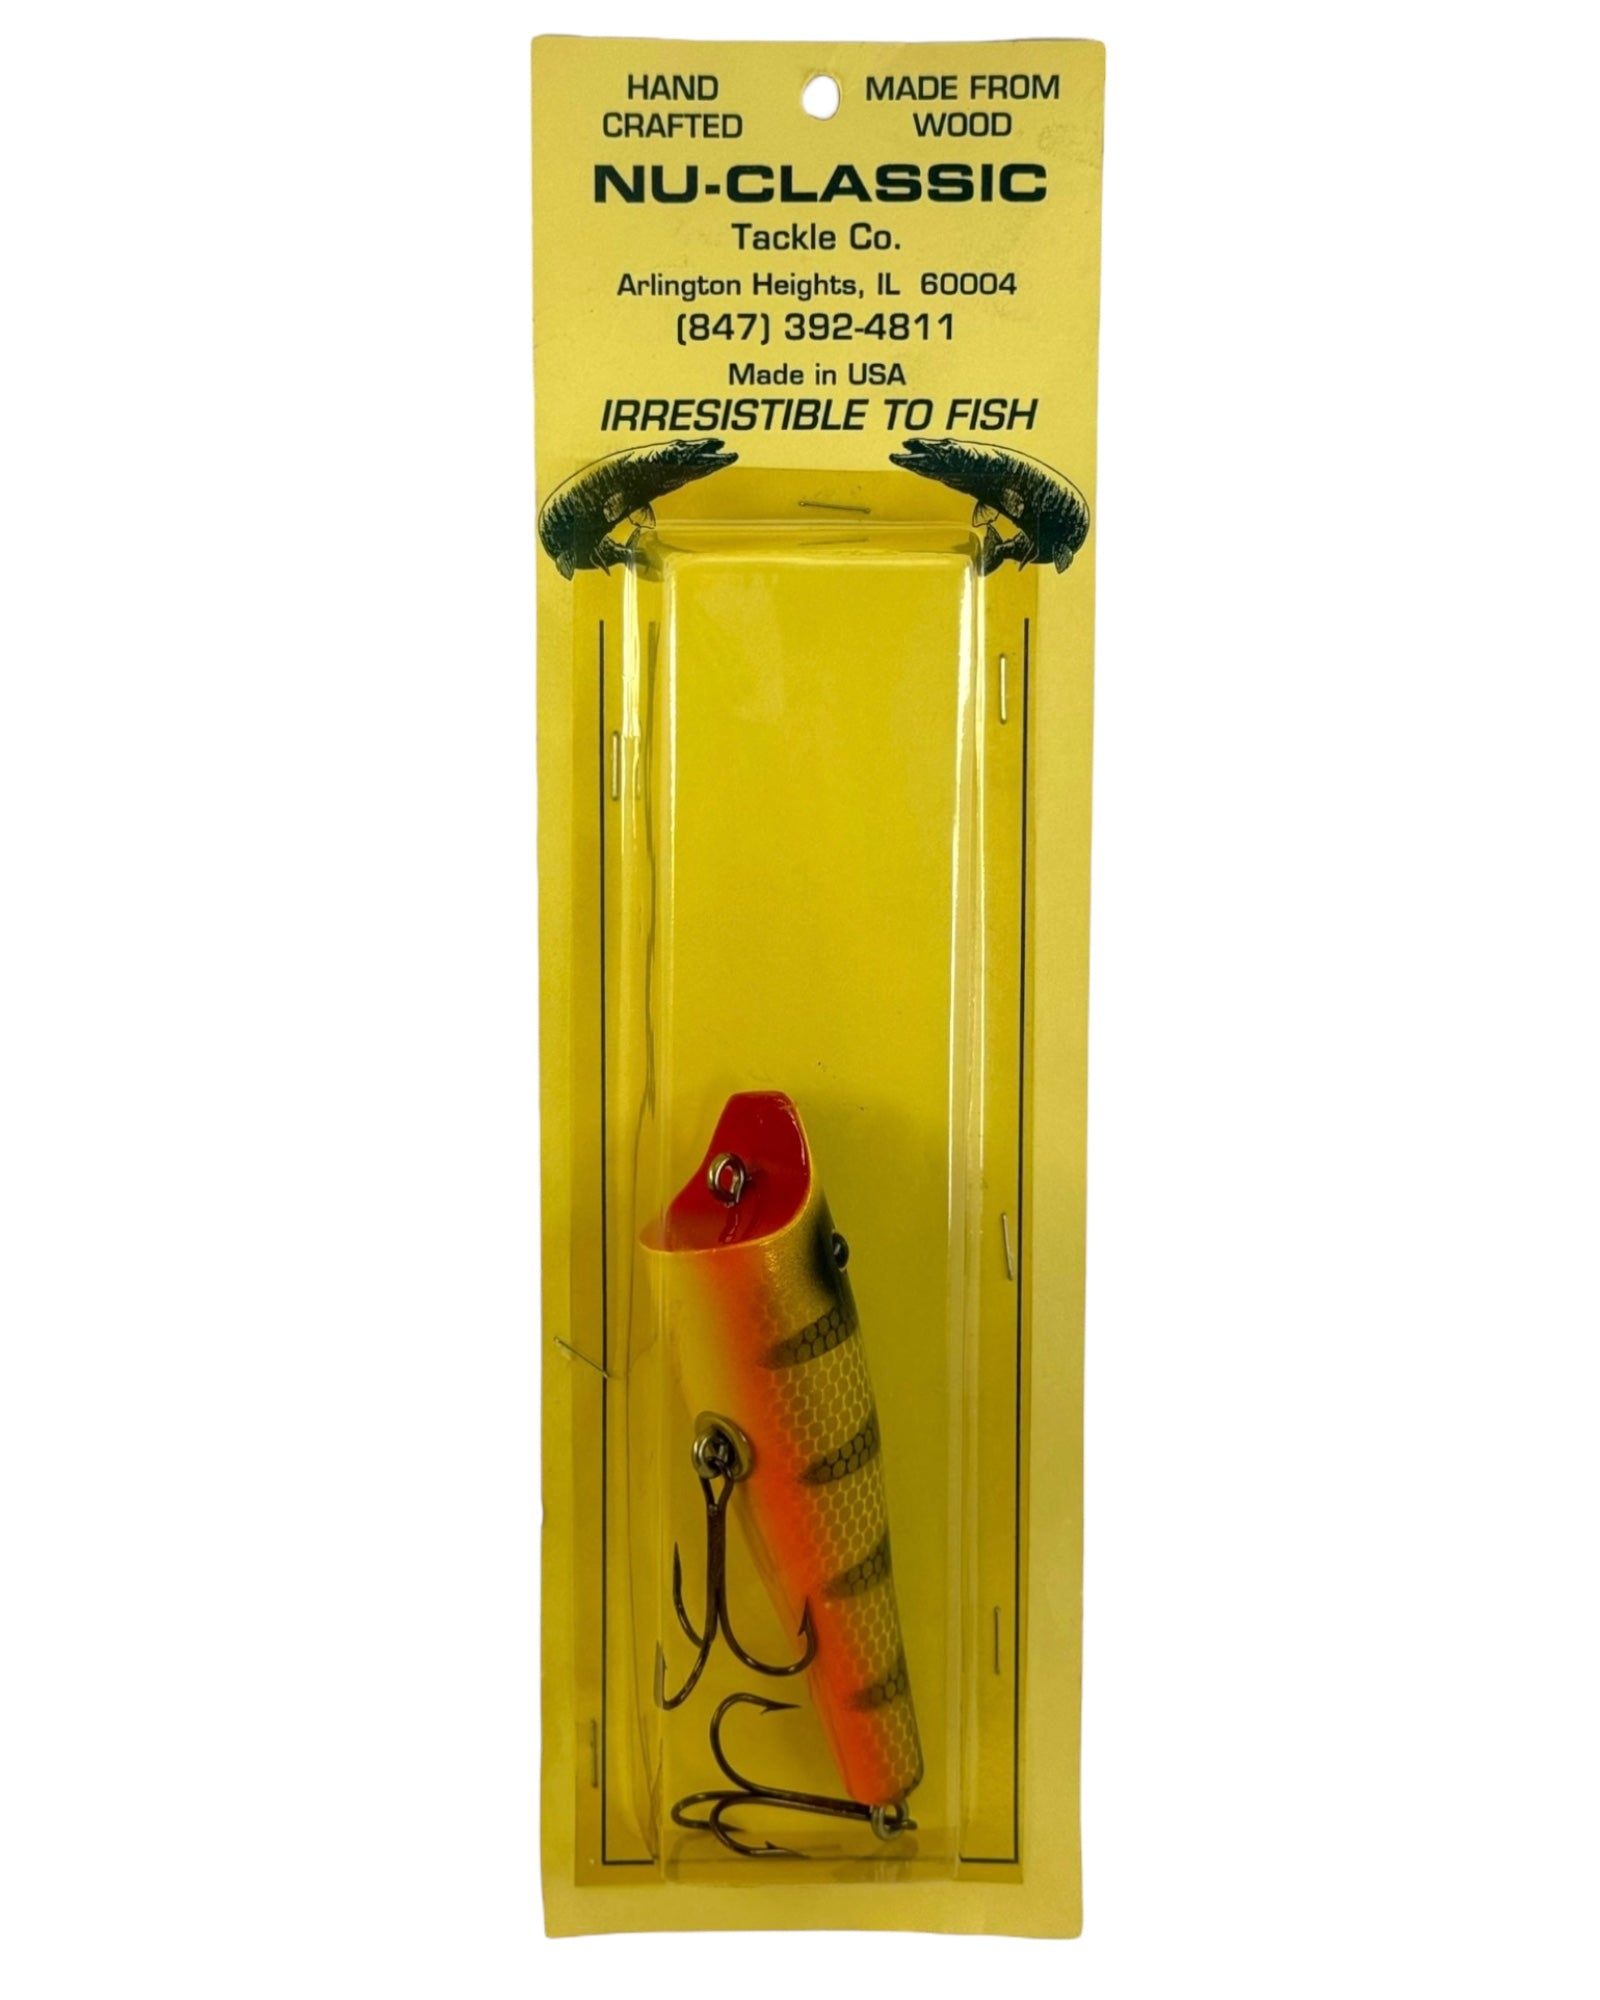 The GAPEN Company 4 POLISH PERCH Fishing Lure • FLOATER – Toad Tackle